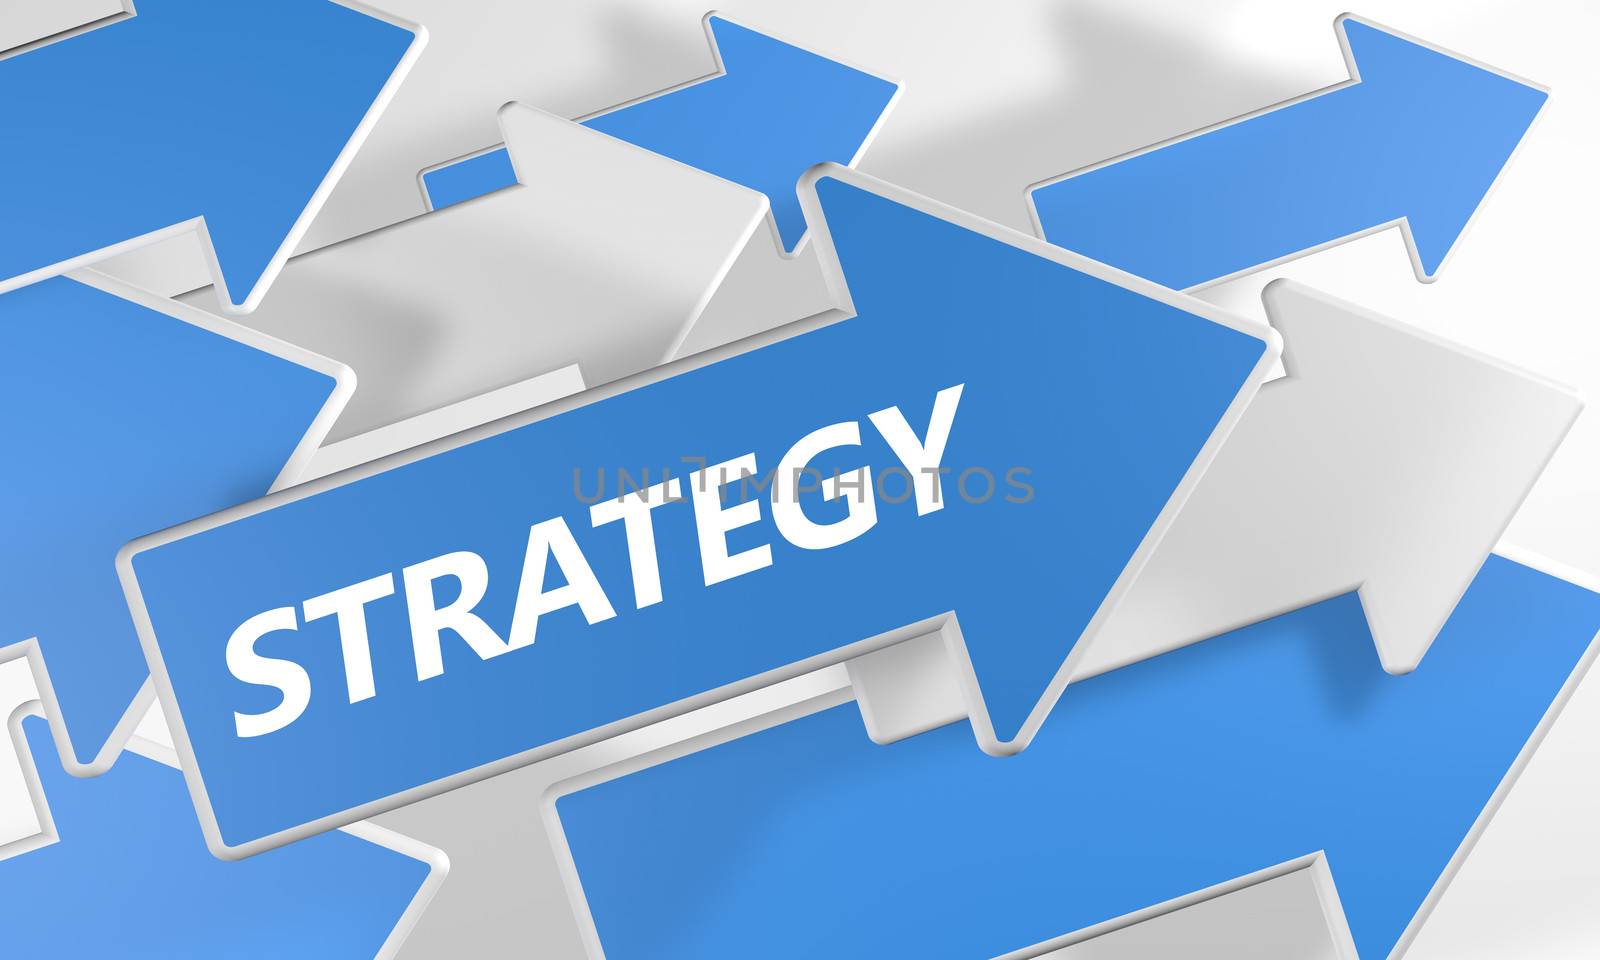 Strategy 3d render concept with blue and white arrows flying upwards over a white background.